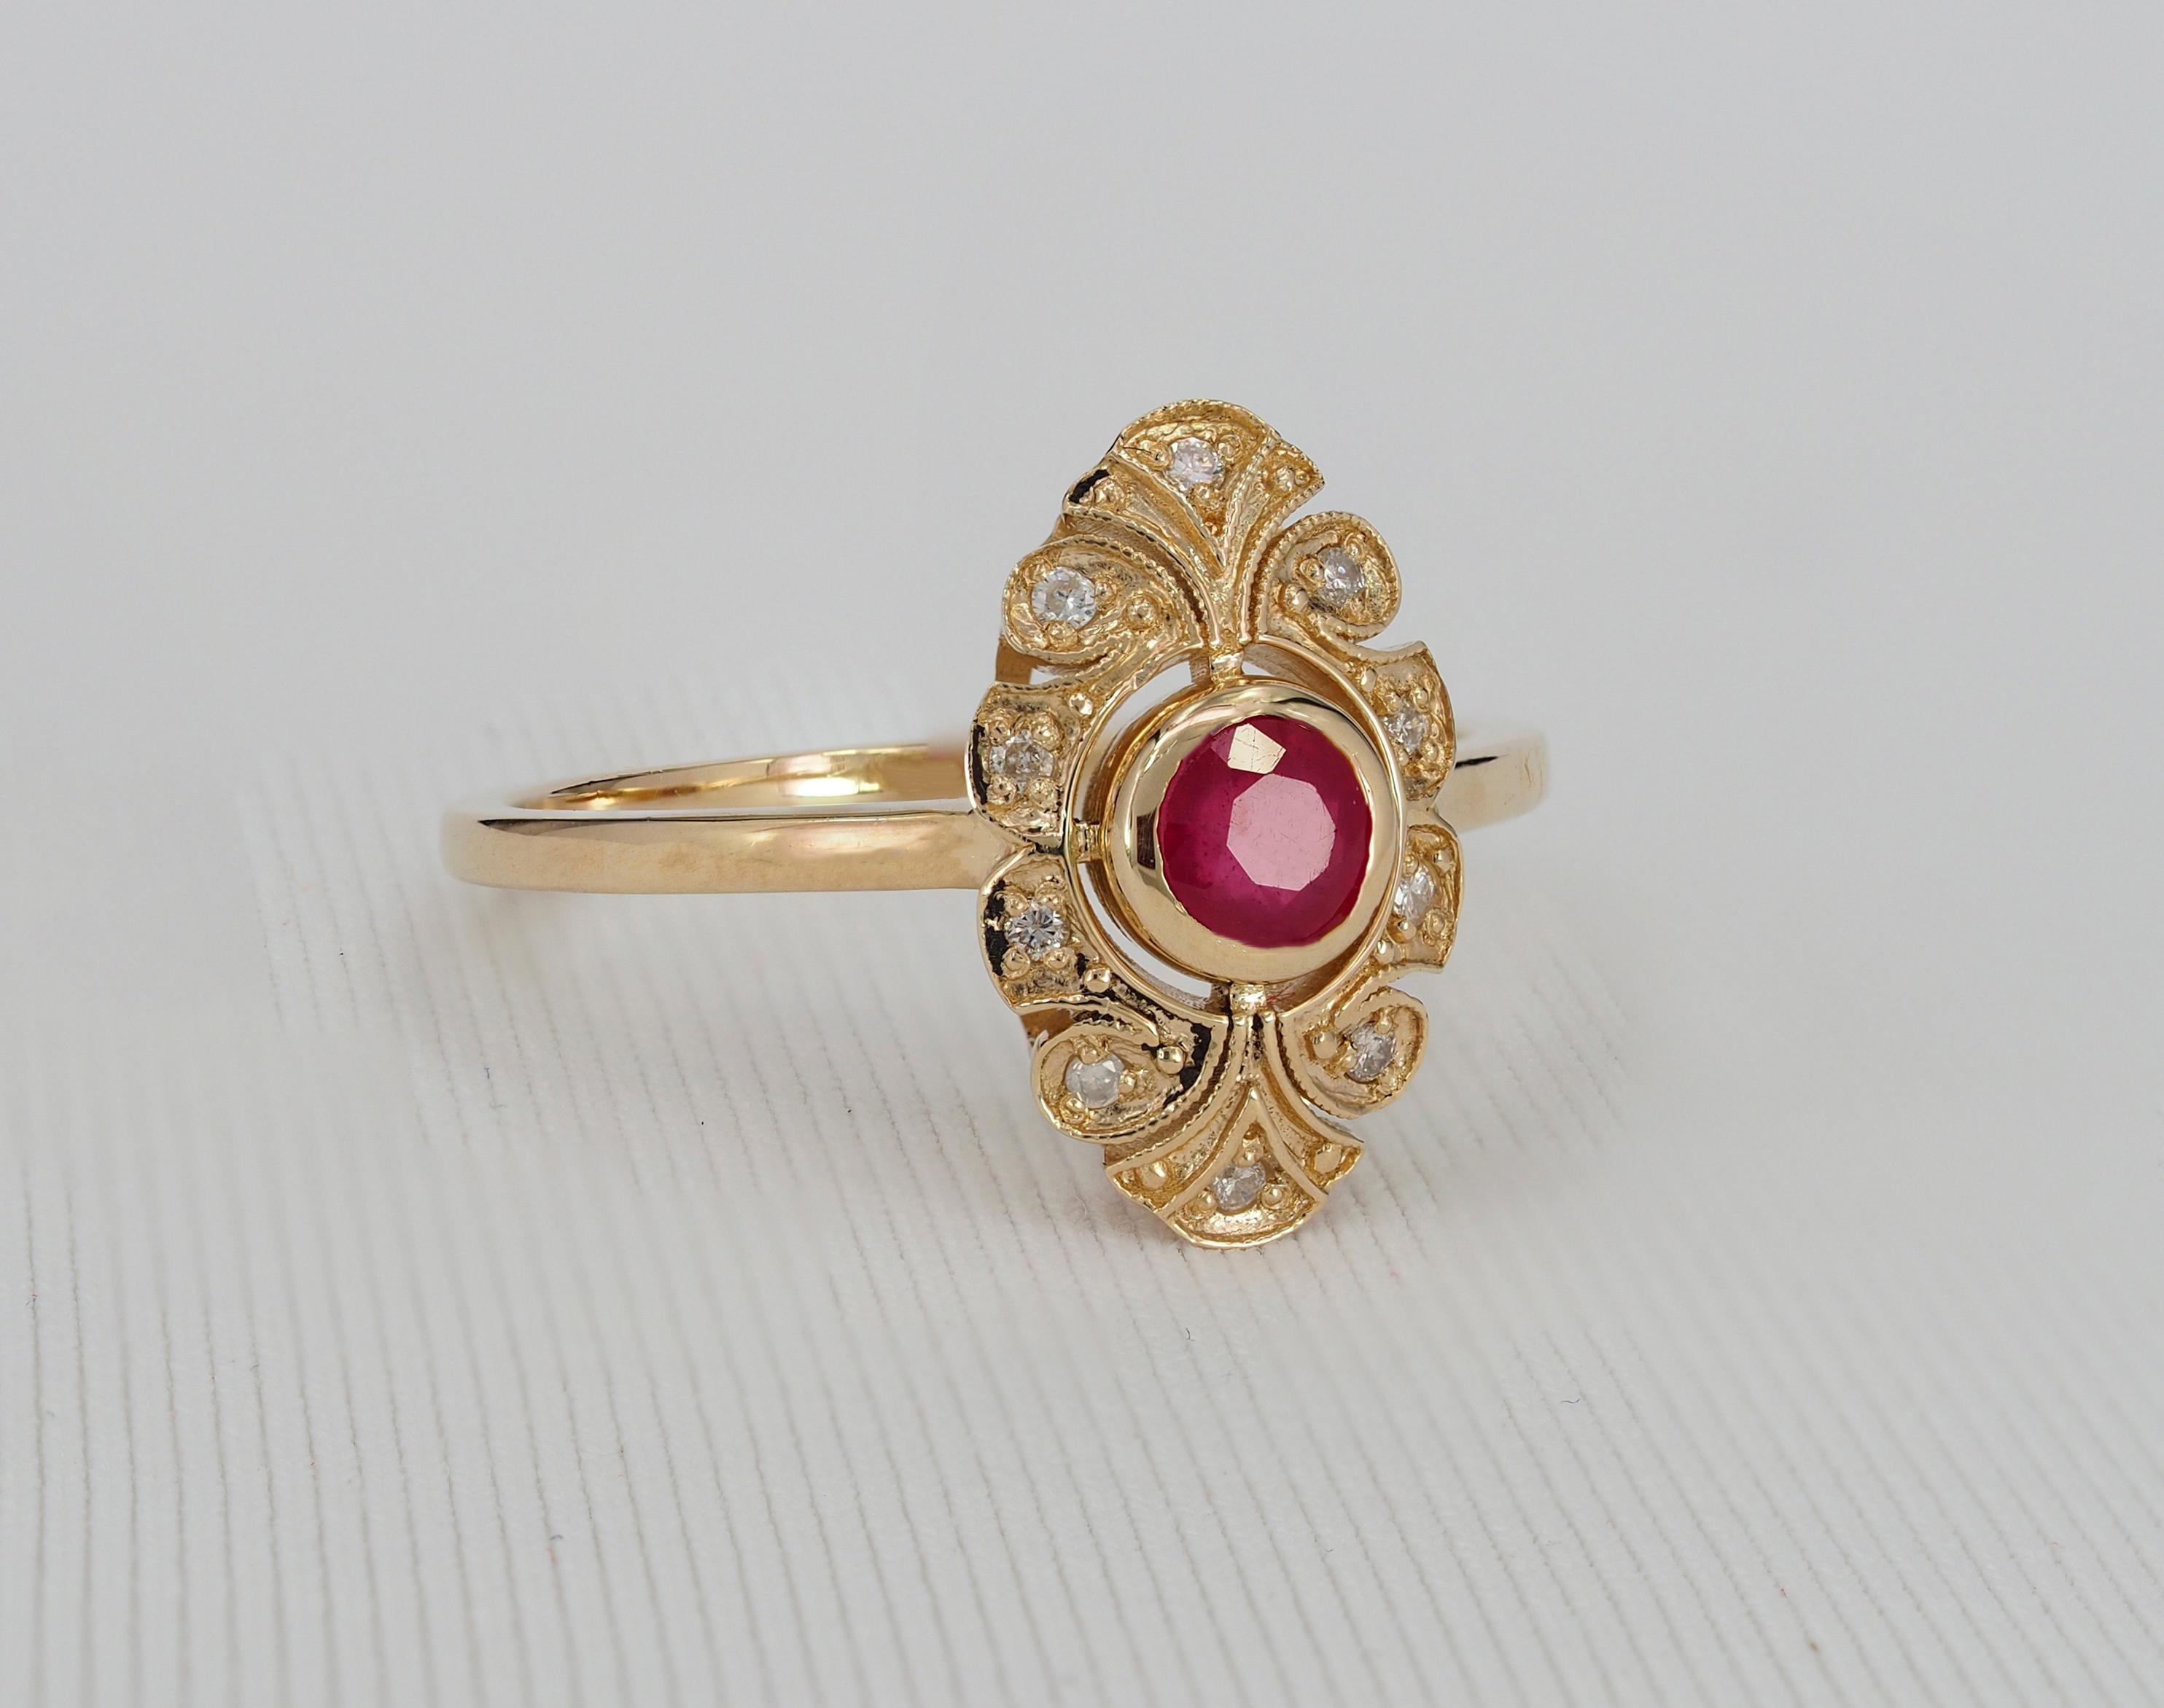 For Sale:  14 karat Gold Ring with Ruby and Diamonds, Vintage Inspired Ring.  4